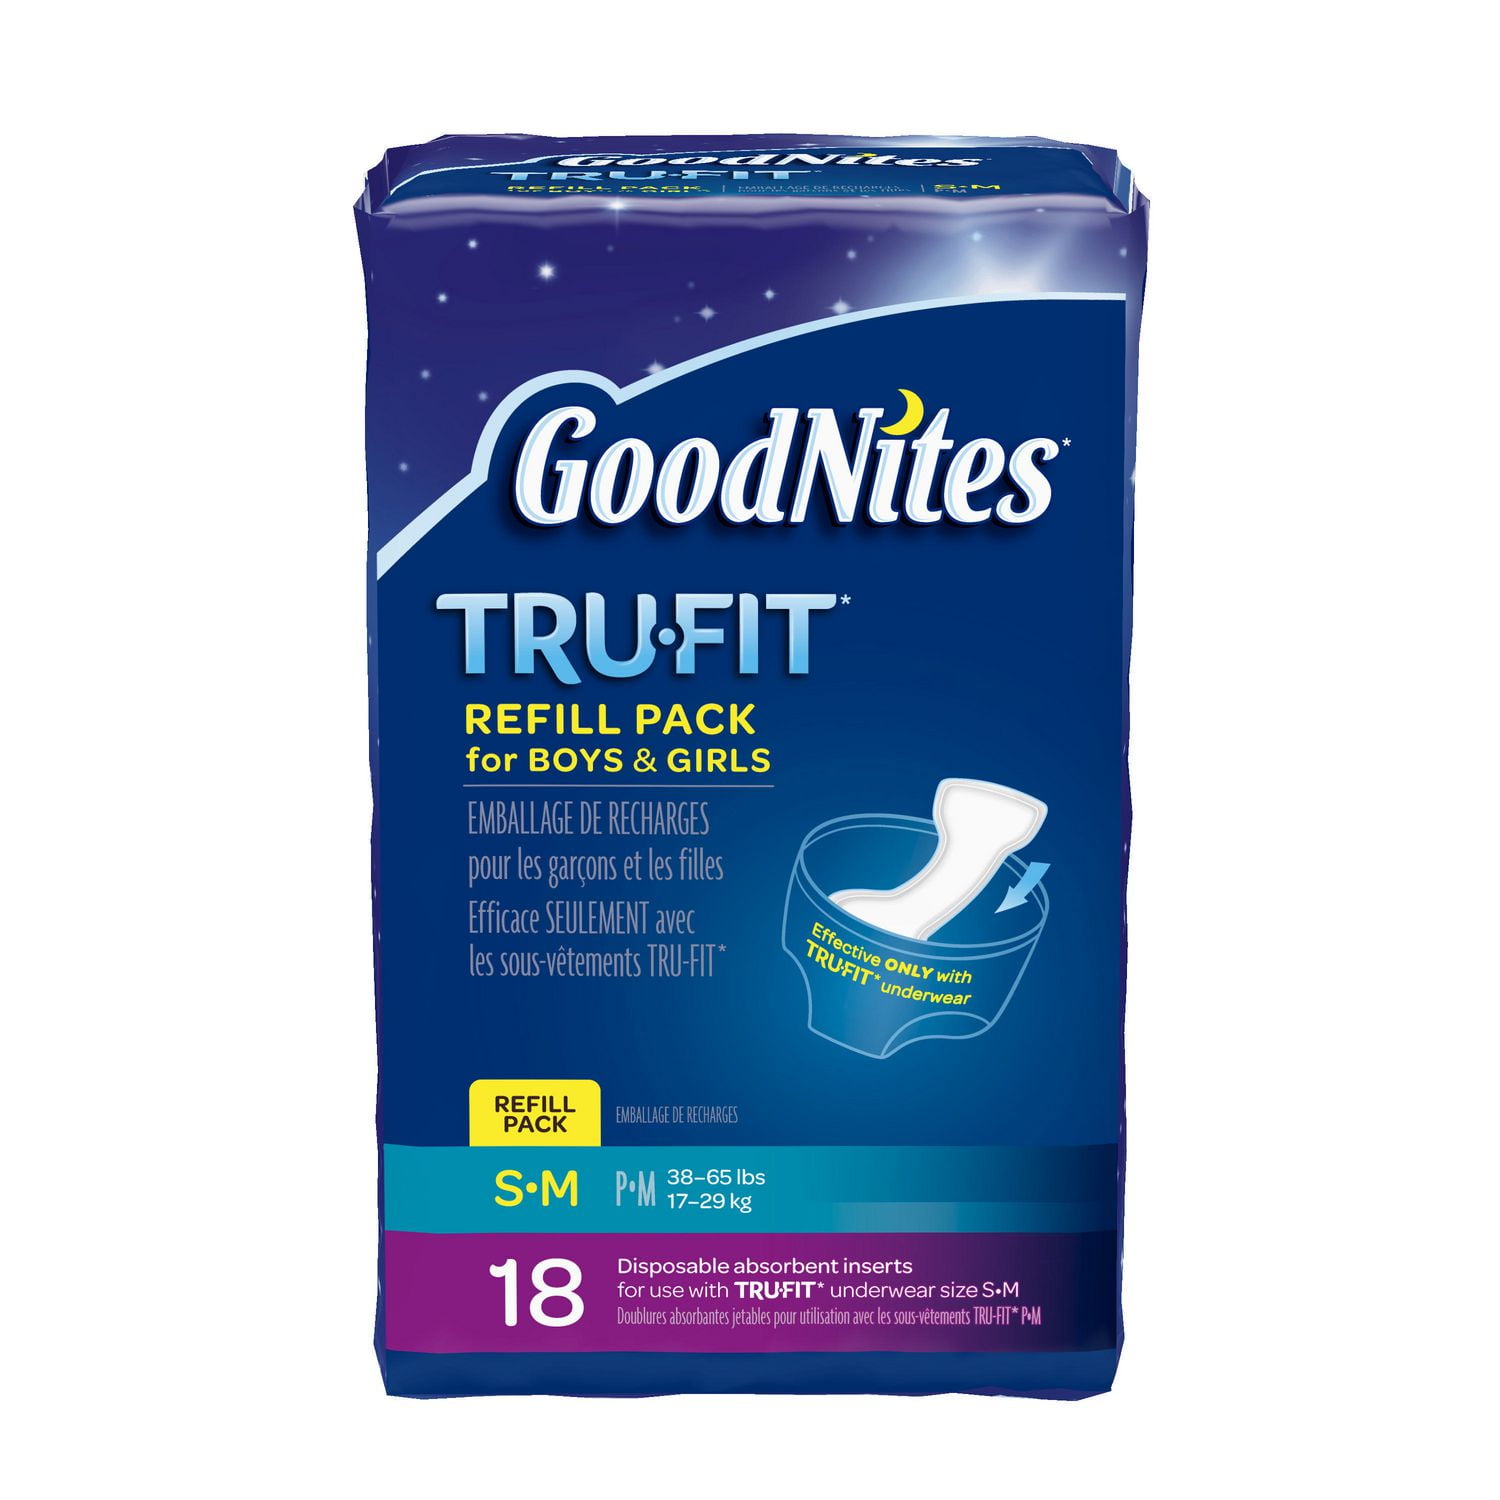 Goodnites Tru-Fit Real Underwear Disposable Absorbent Inserts Refill Pack  for Boys & Girls 